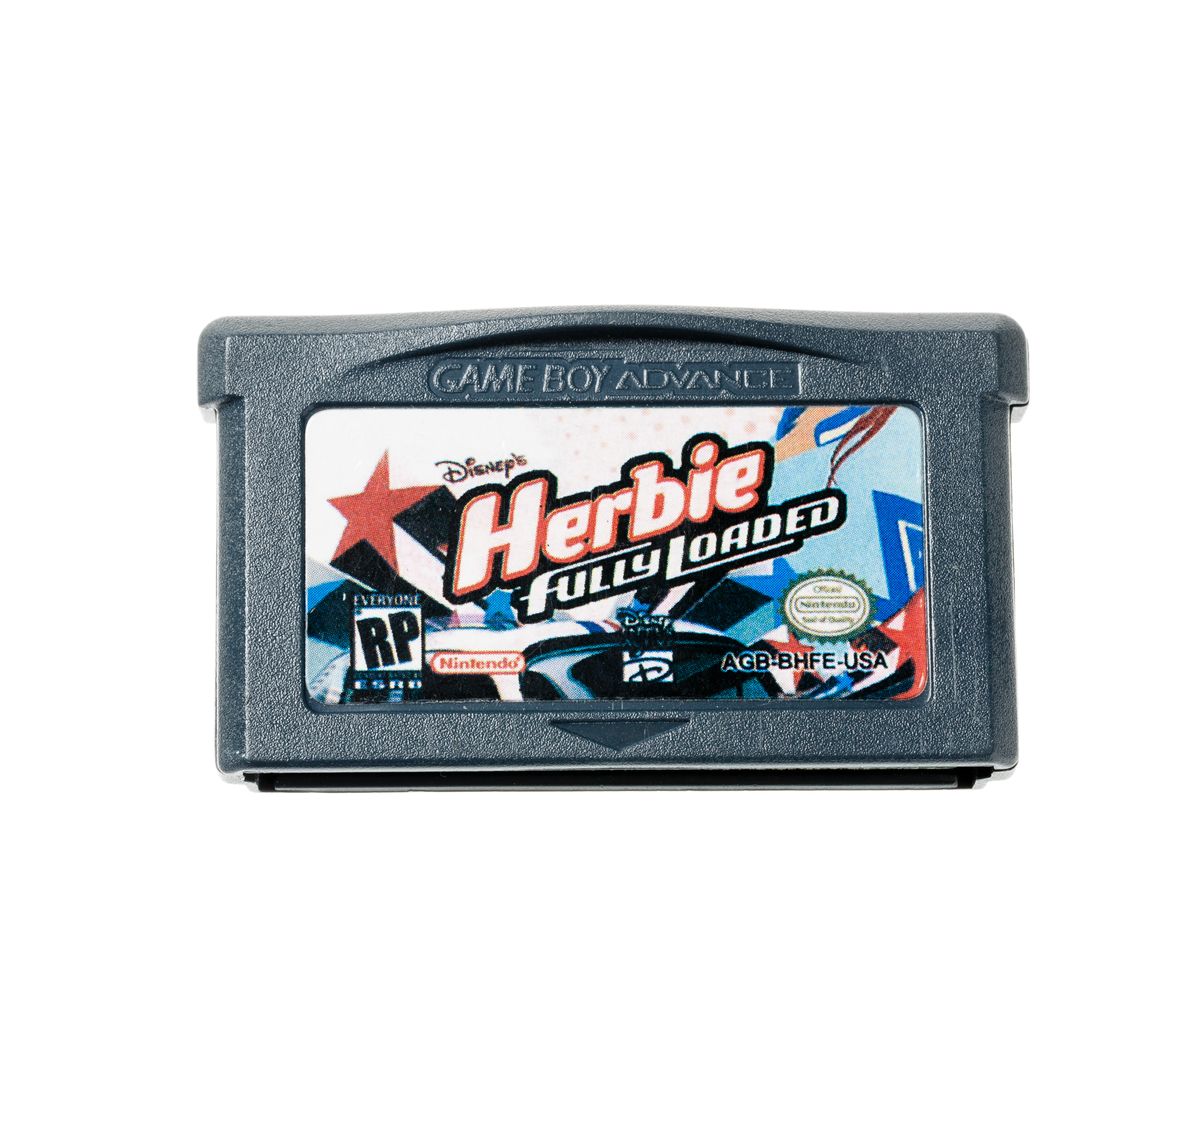 Herbie Fully Loaded - Gameboy Advance Games